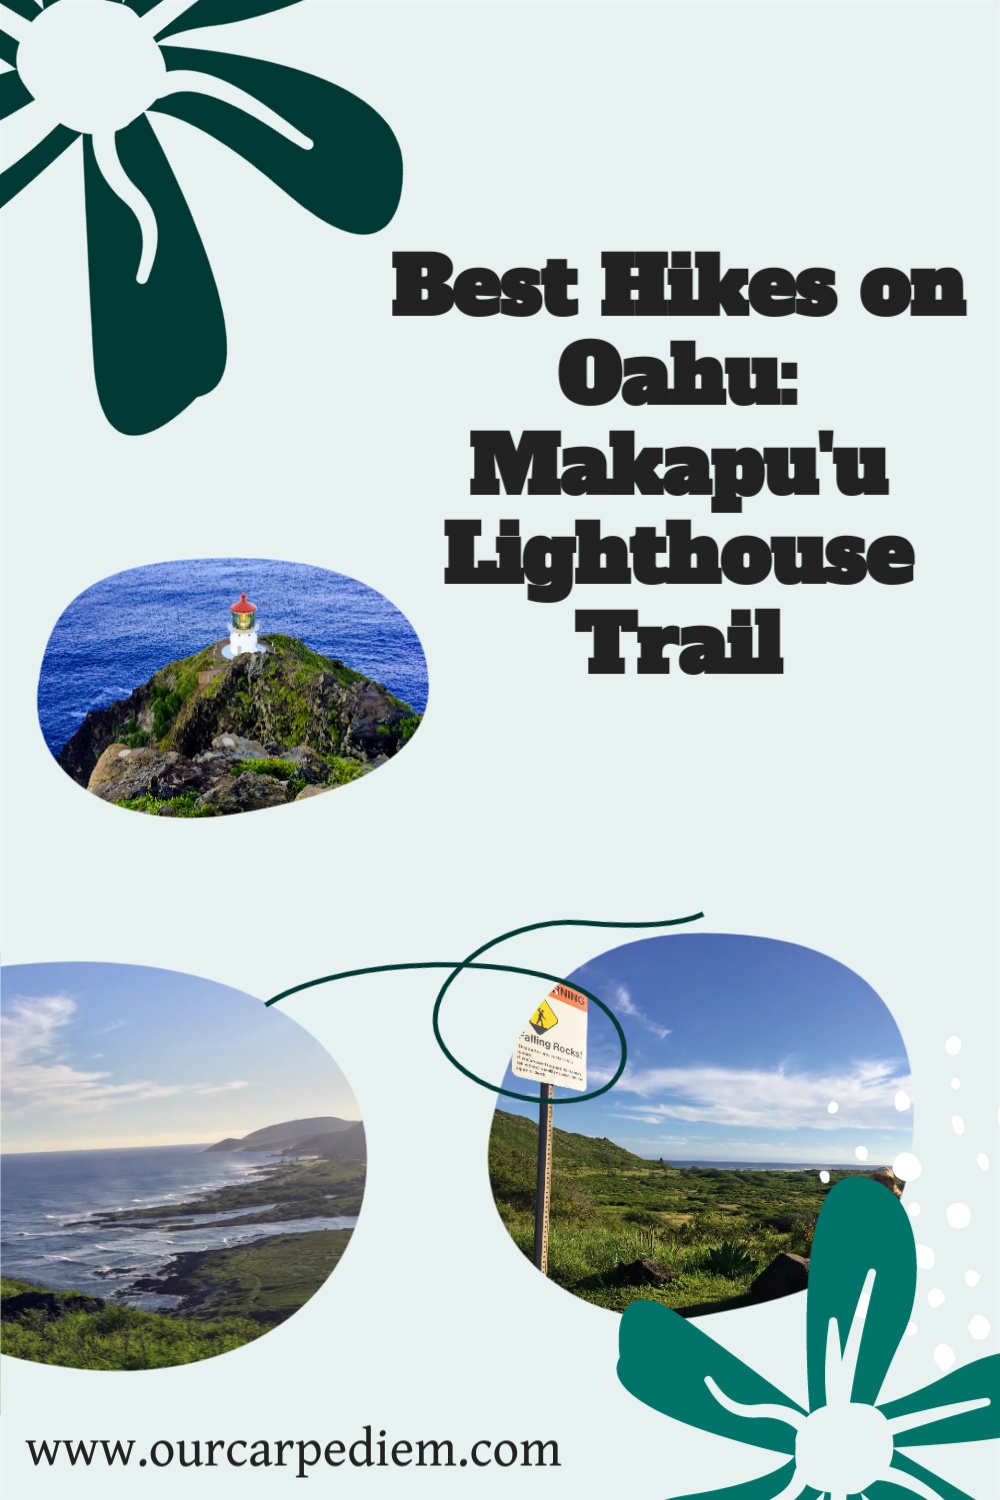 The Makapu’u Lighthouse trail is one of the most popular hikes on Oahu, Hawai’i. How hard is the hike? What is the history of the lighthouse? How long is the trail? Can you really see humpback whales from the shore? The trail has epic views! Find out what a Fresnel lens is. What to expect if you are not as fit as the average bear or suffer from a chronic illness like MS. The #sunset was amazing! #OurCarpeDiem #Hawaii #hiking #multiplesclerosis #chronicillness #spoonie #makapuu